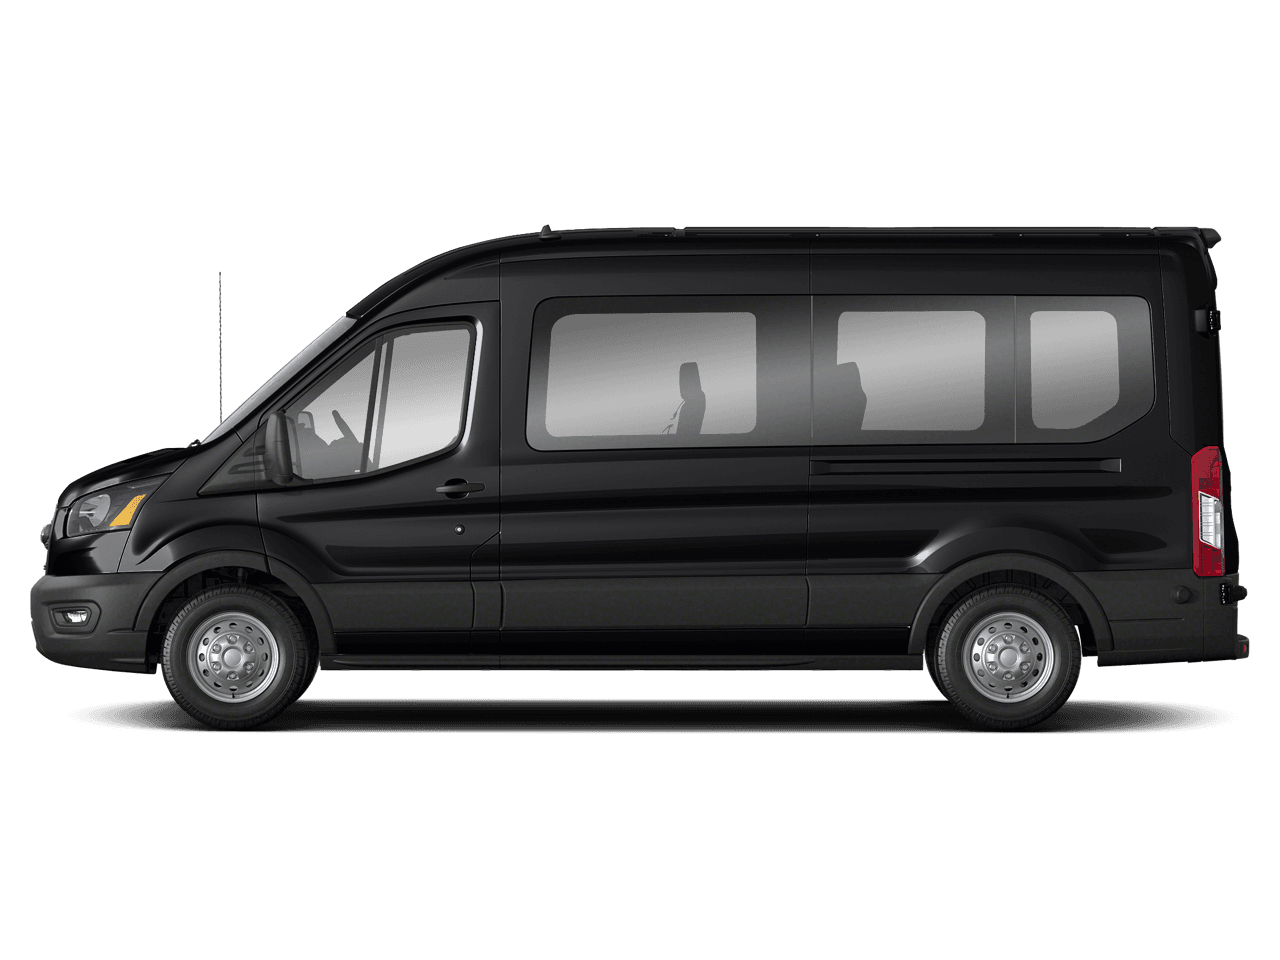 2020 Ford Transit Wagon Photo in Bethesda, MD 20814